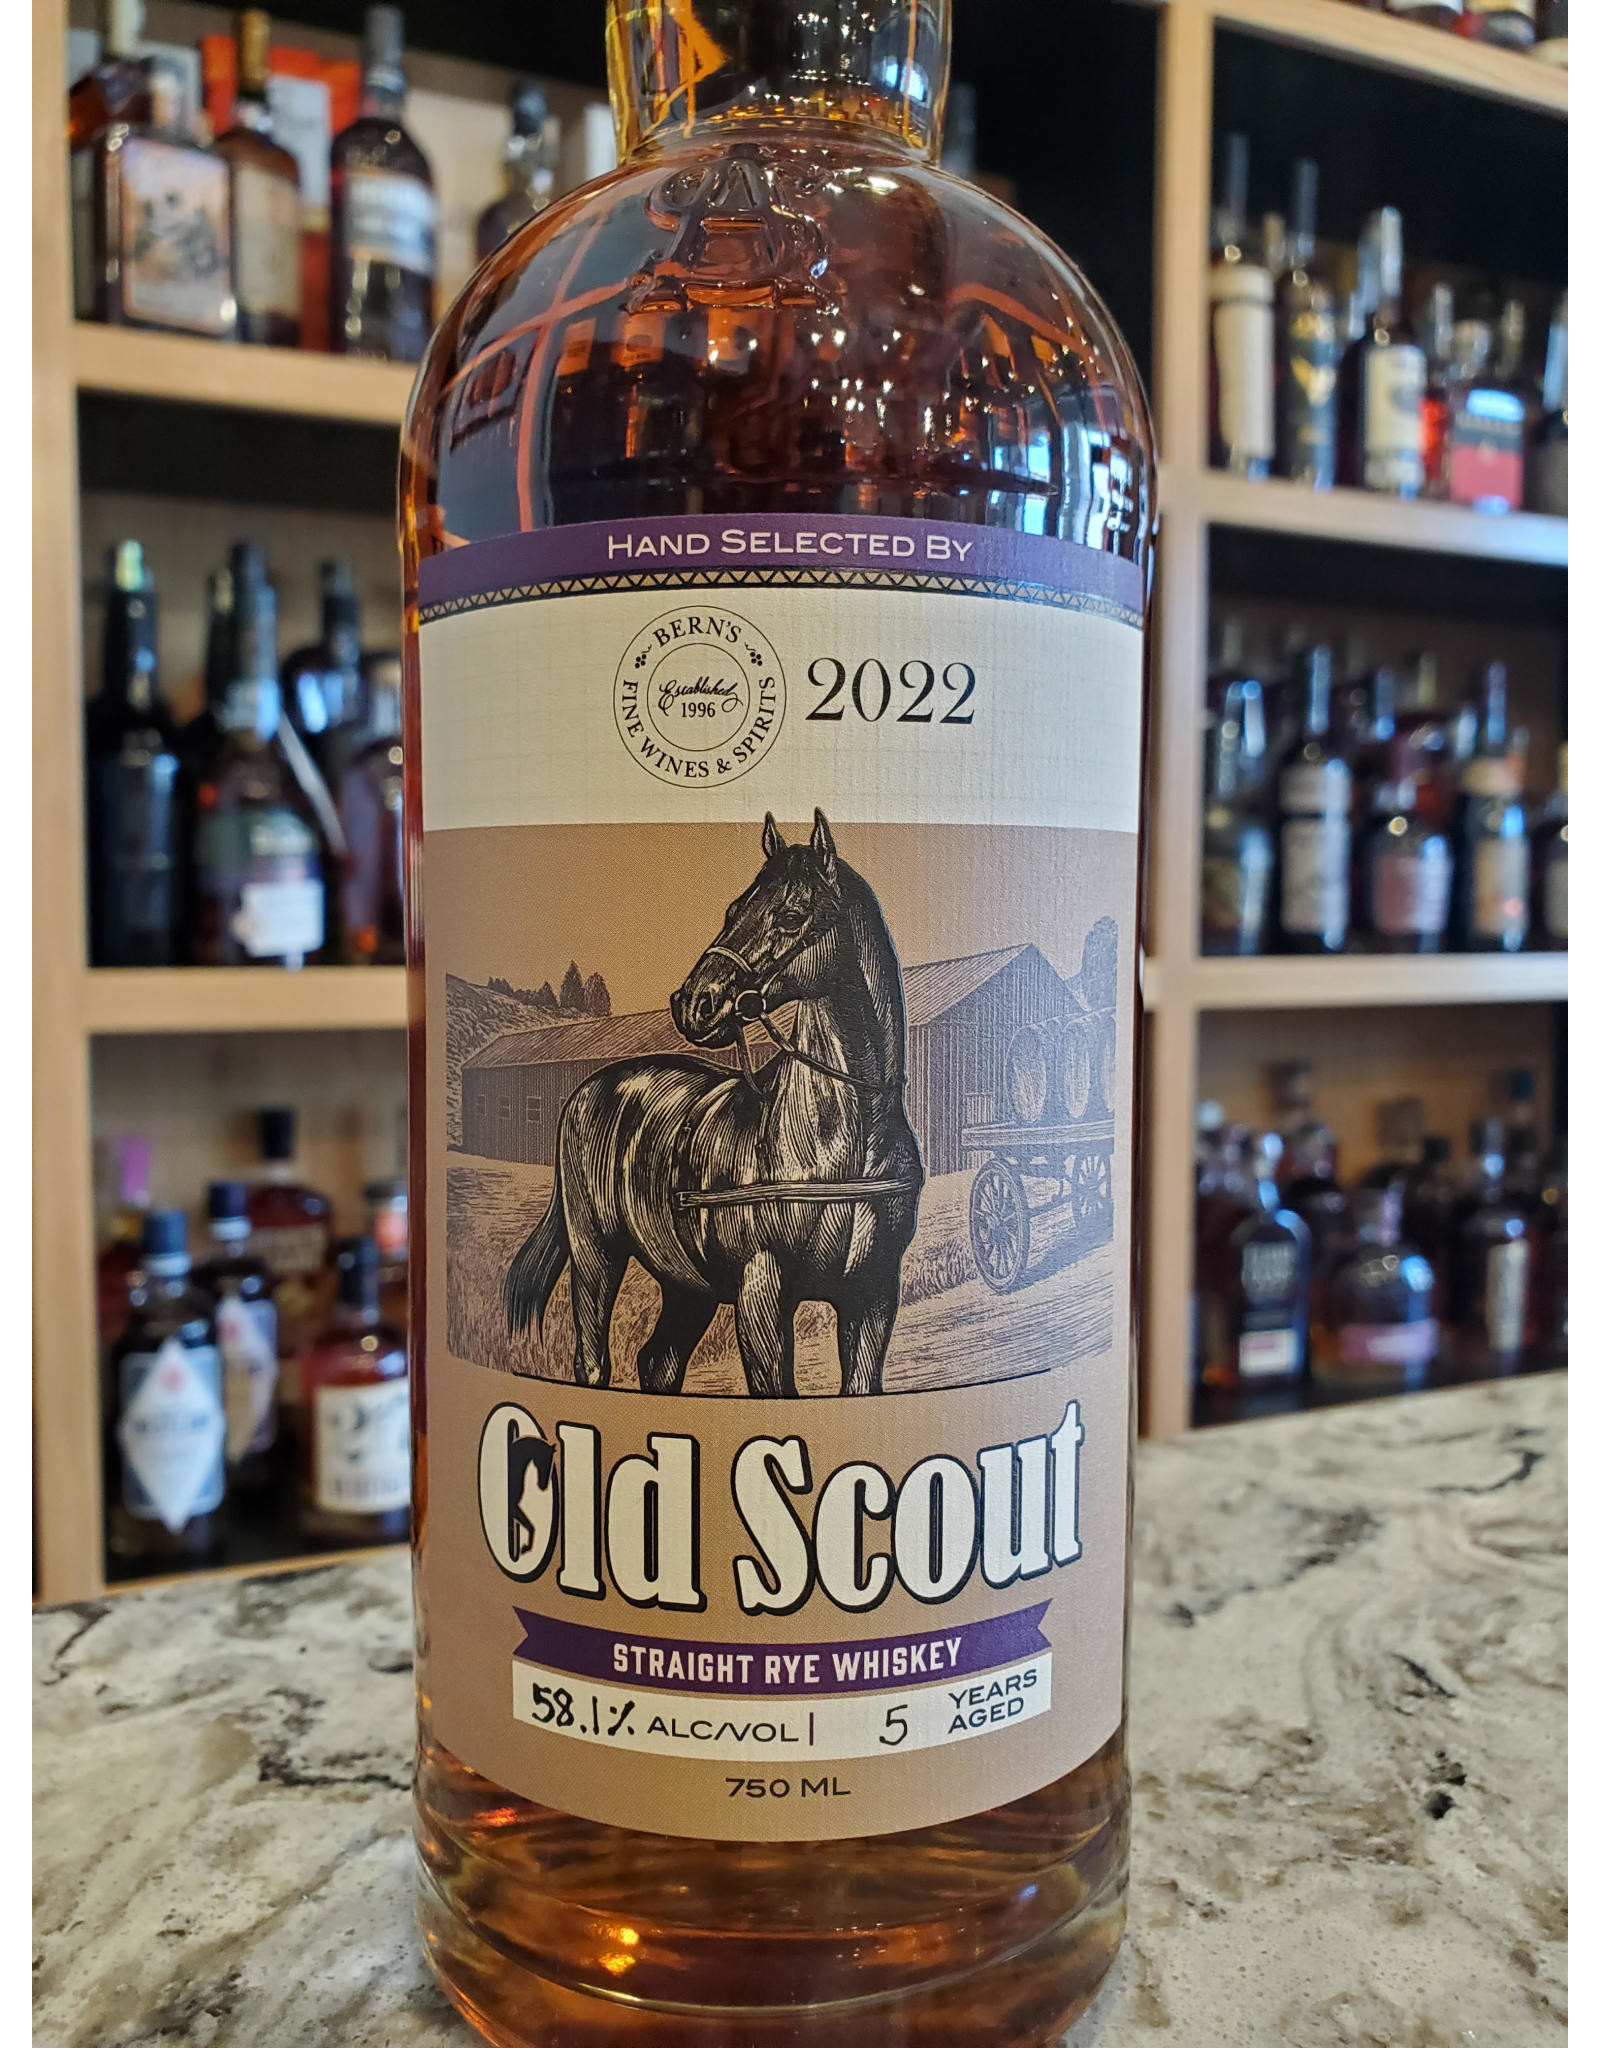 Bern’s Select, Old Scout, 5 Year, Rye